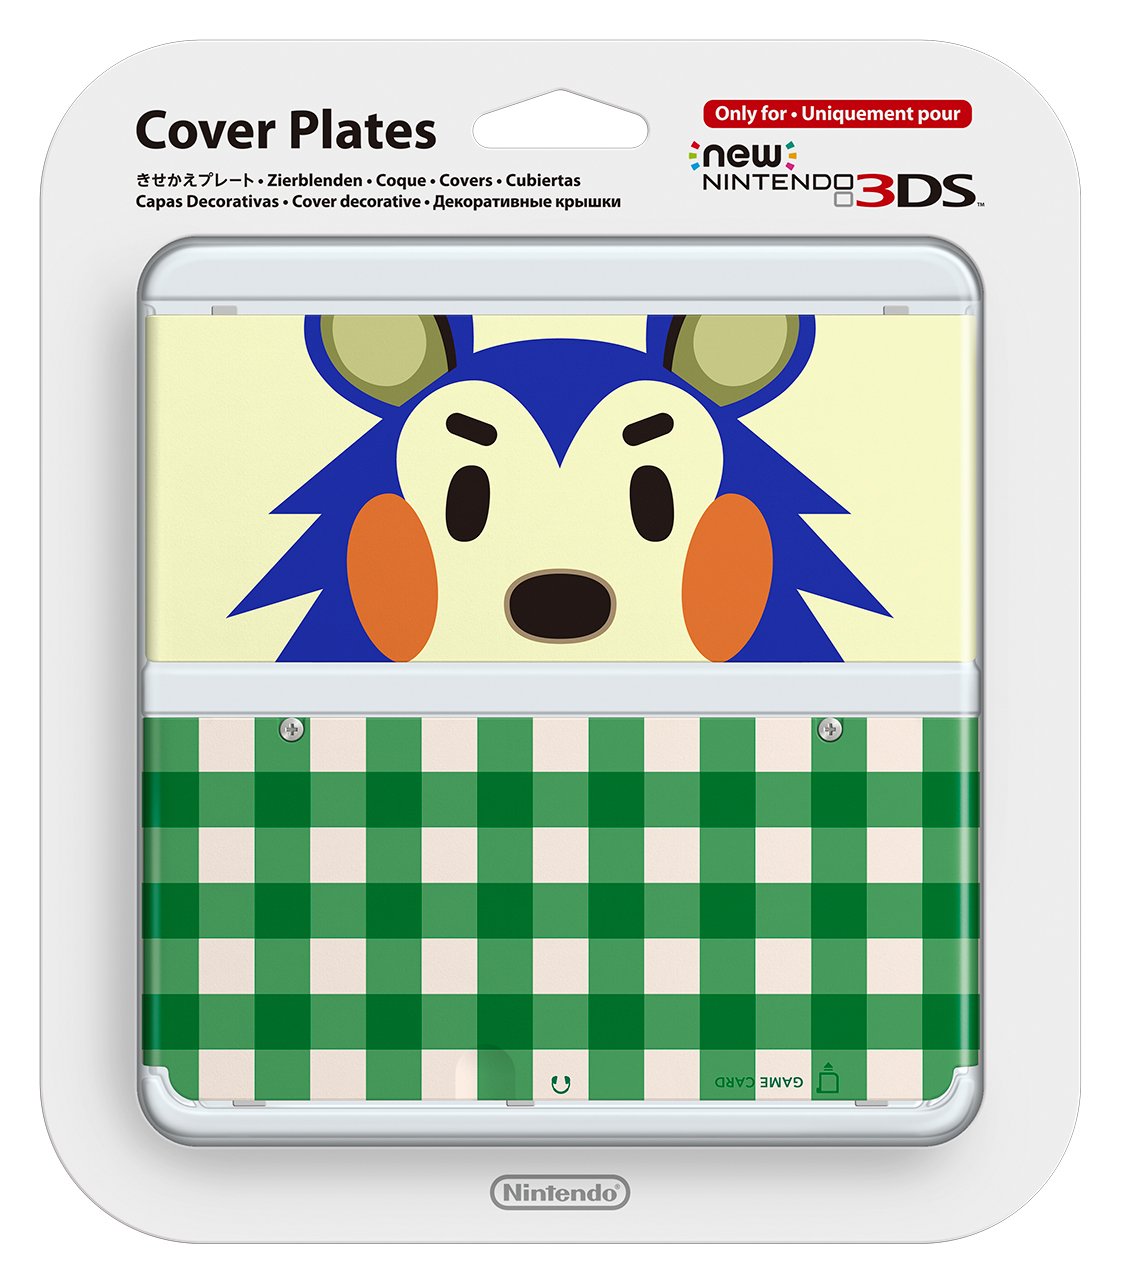 New Nintendo 3ds Cover Plates [Nintendo 3DS]No.015(forest very stricken). Only for Nintendo New 3DS Japan Import